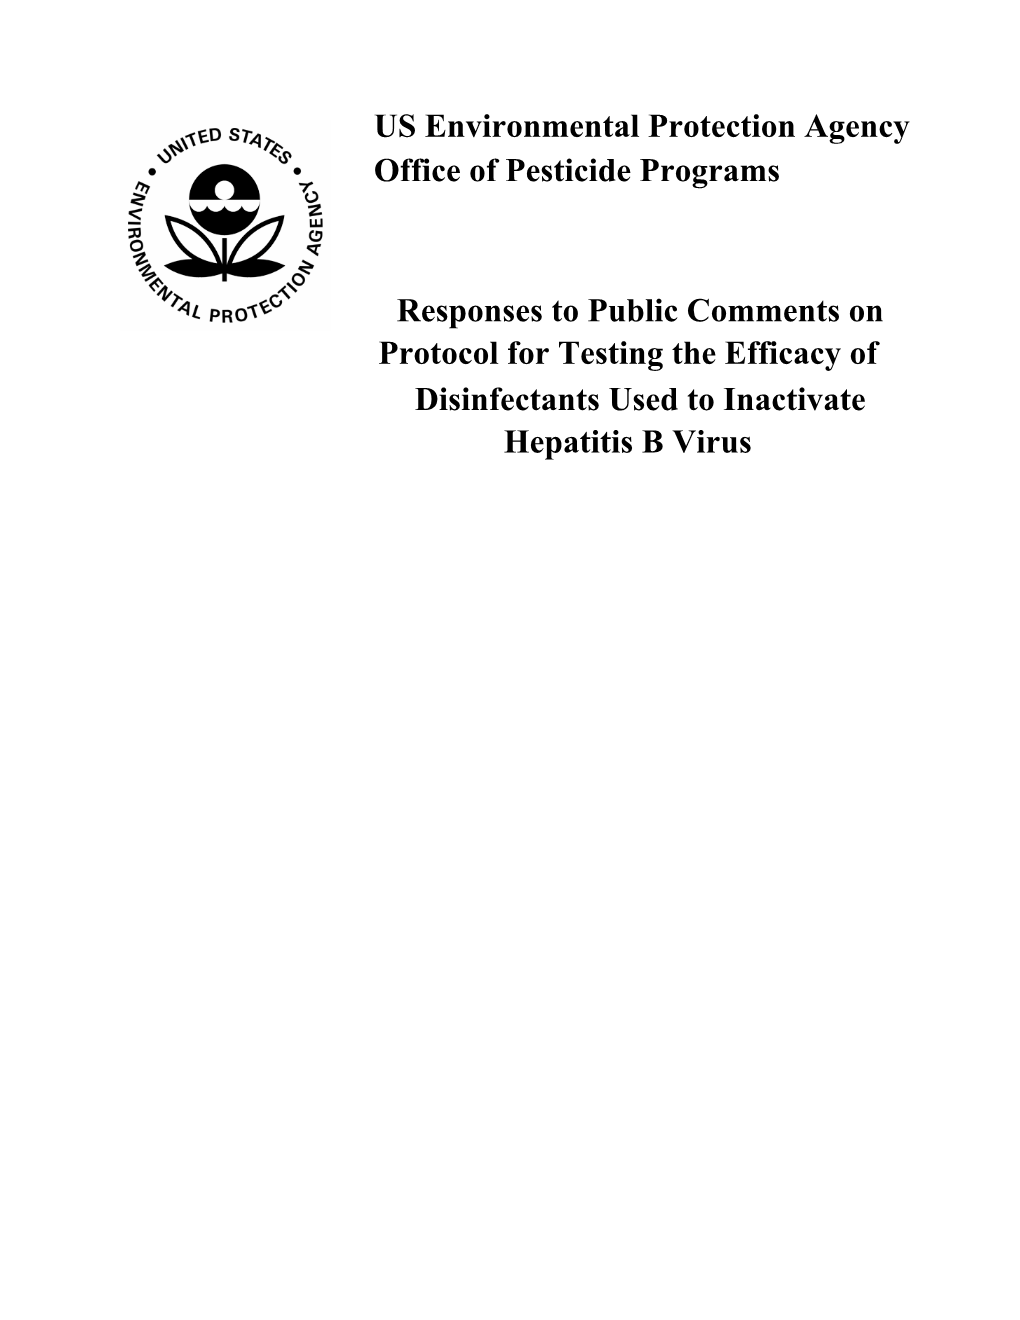 US Environmental Protection Agency Office of Pesticide Programs